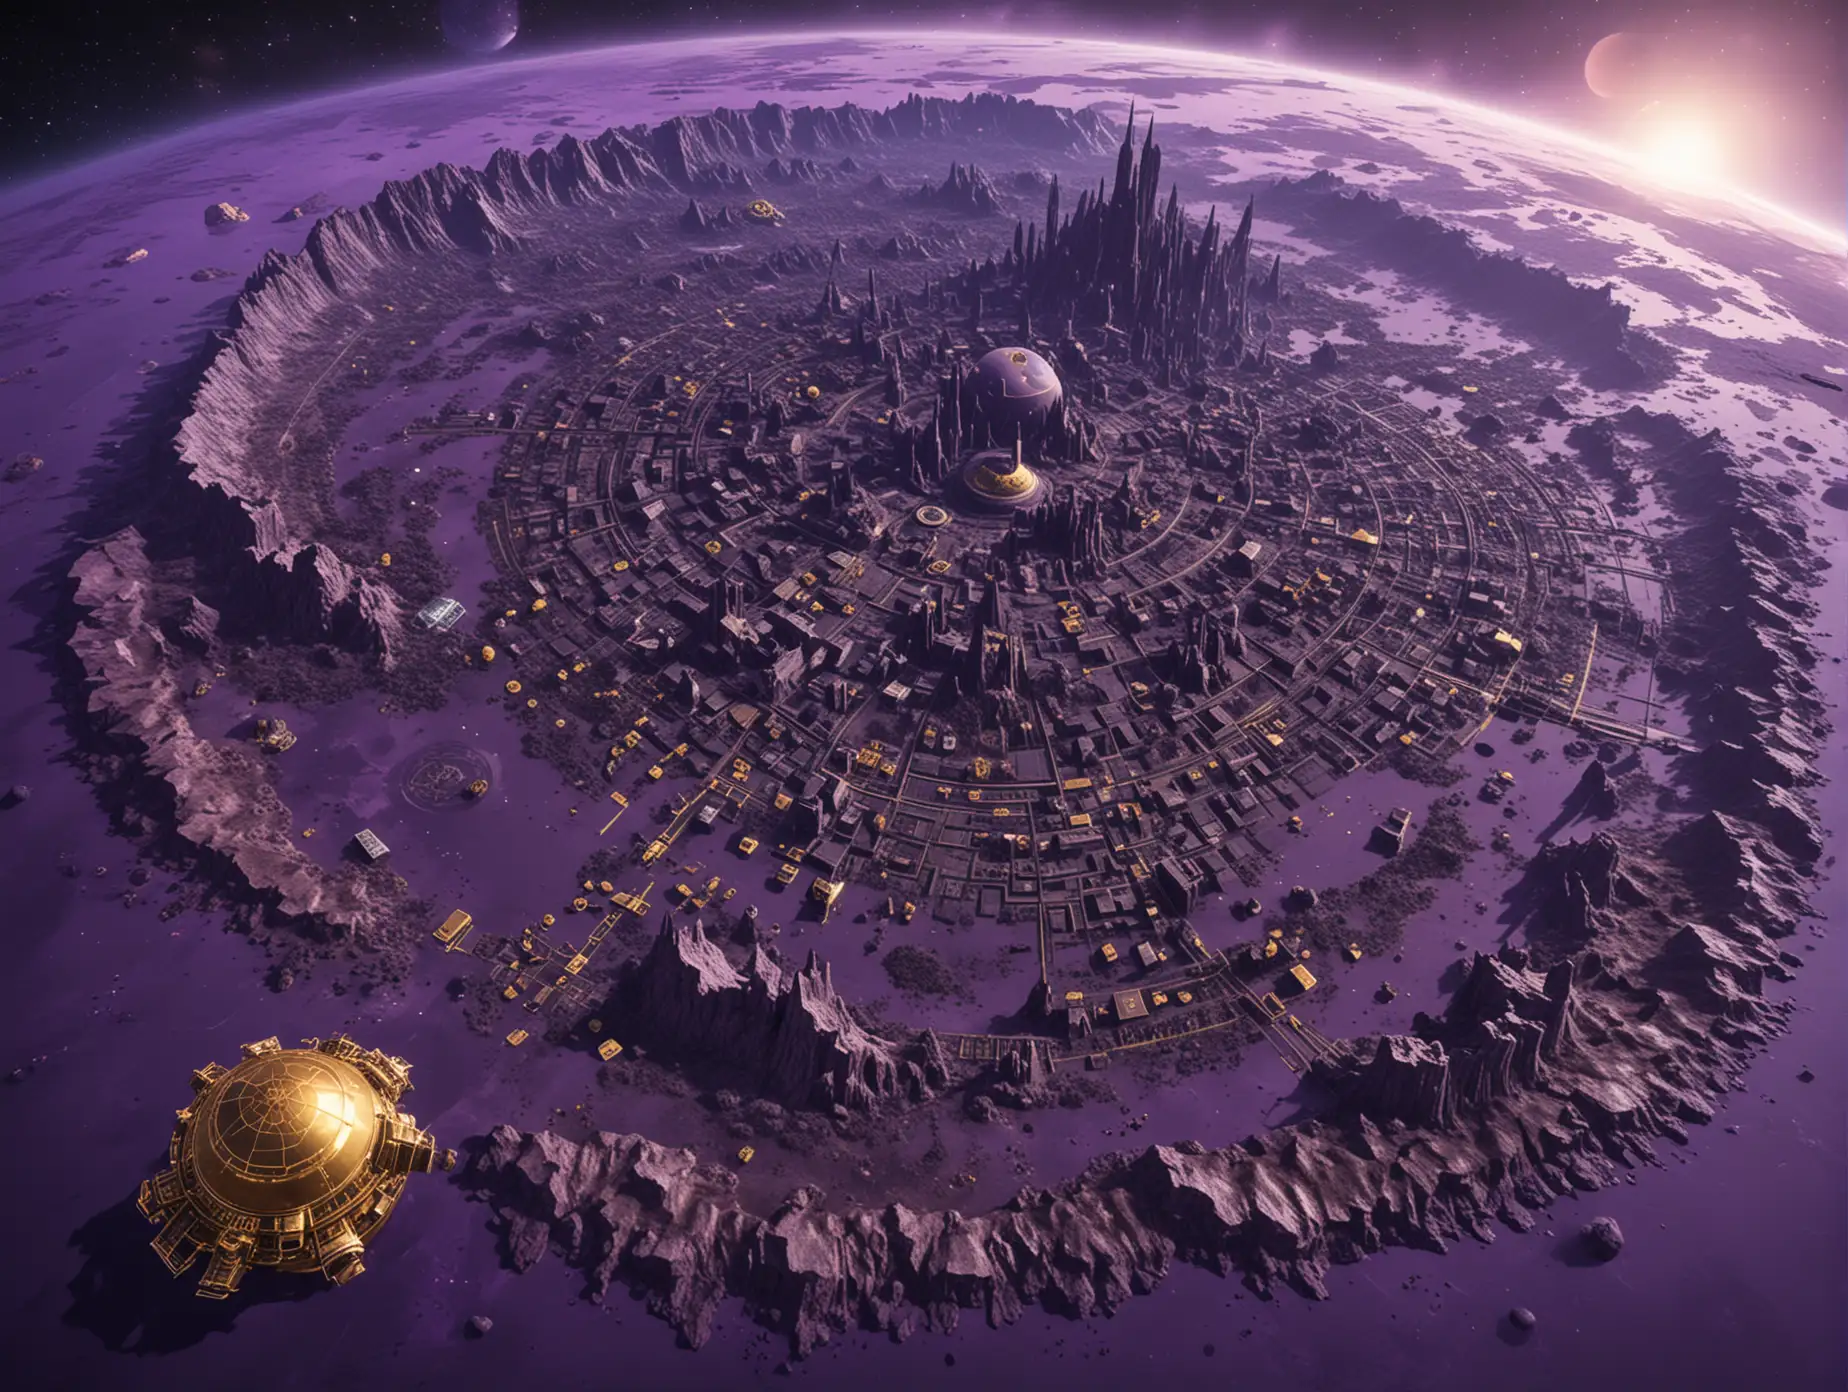 A Very huge unexplored abadoned Black-purple Planet's huge map. The map's from the top.
The map is abadoned and extinct, The map's majority is PLAIN but some ore and gold sites can be found on the map and one little tech castle on the middle